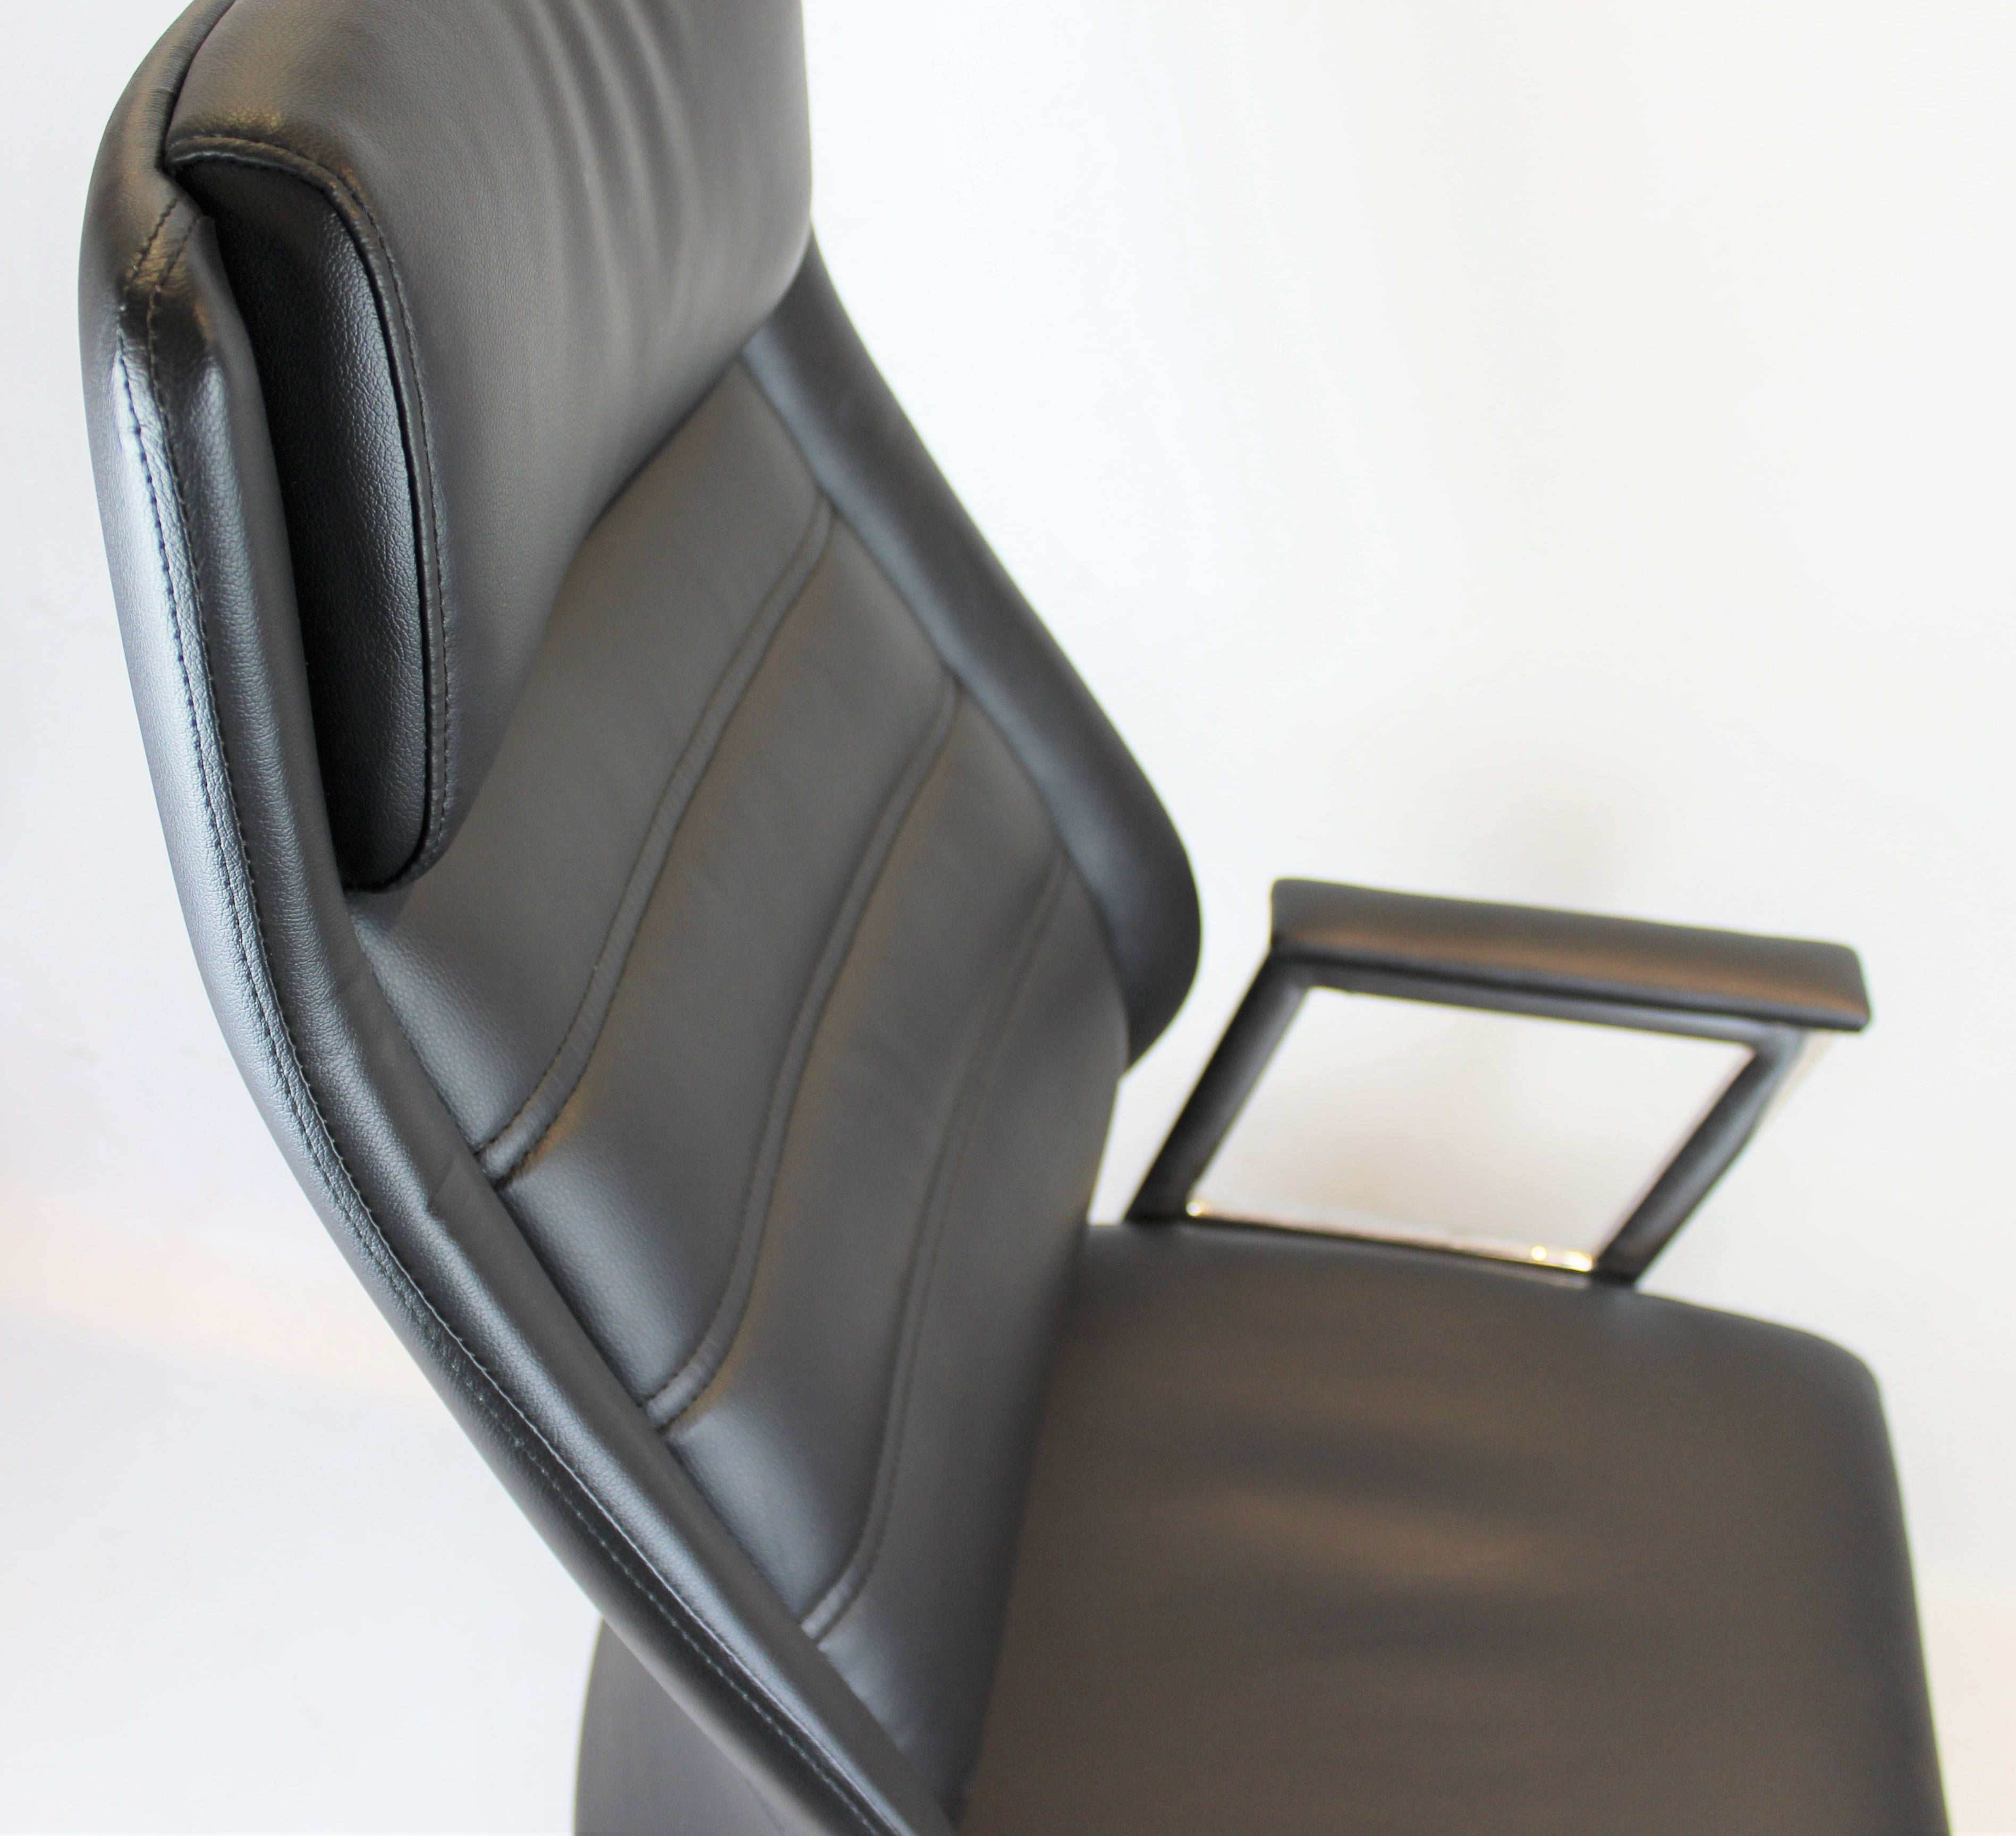 Modern Black Leather Executive Office Chair - DH-103